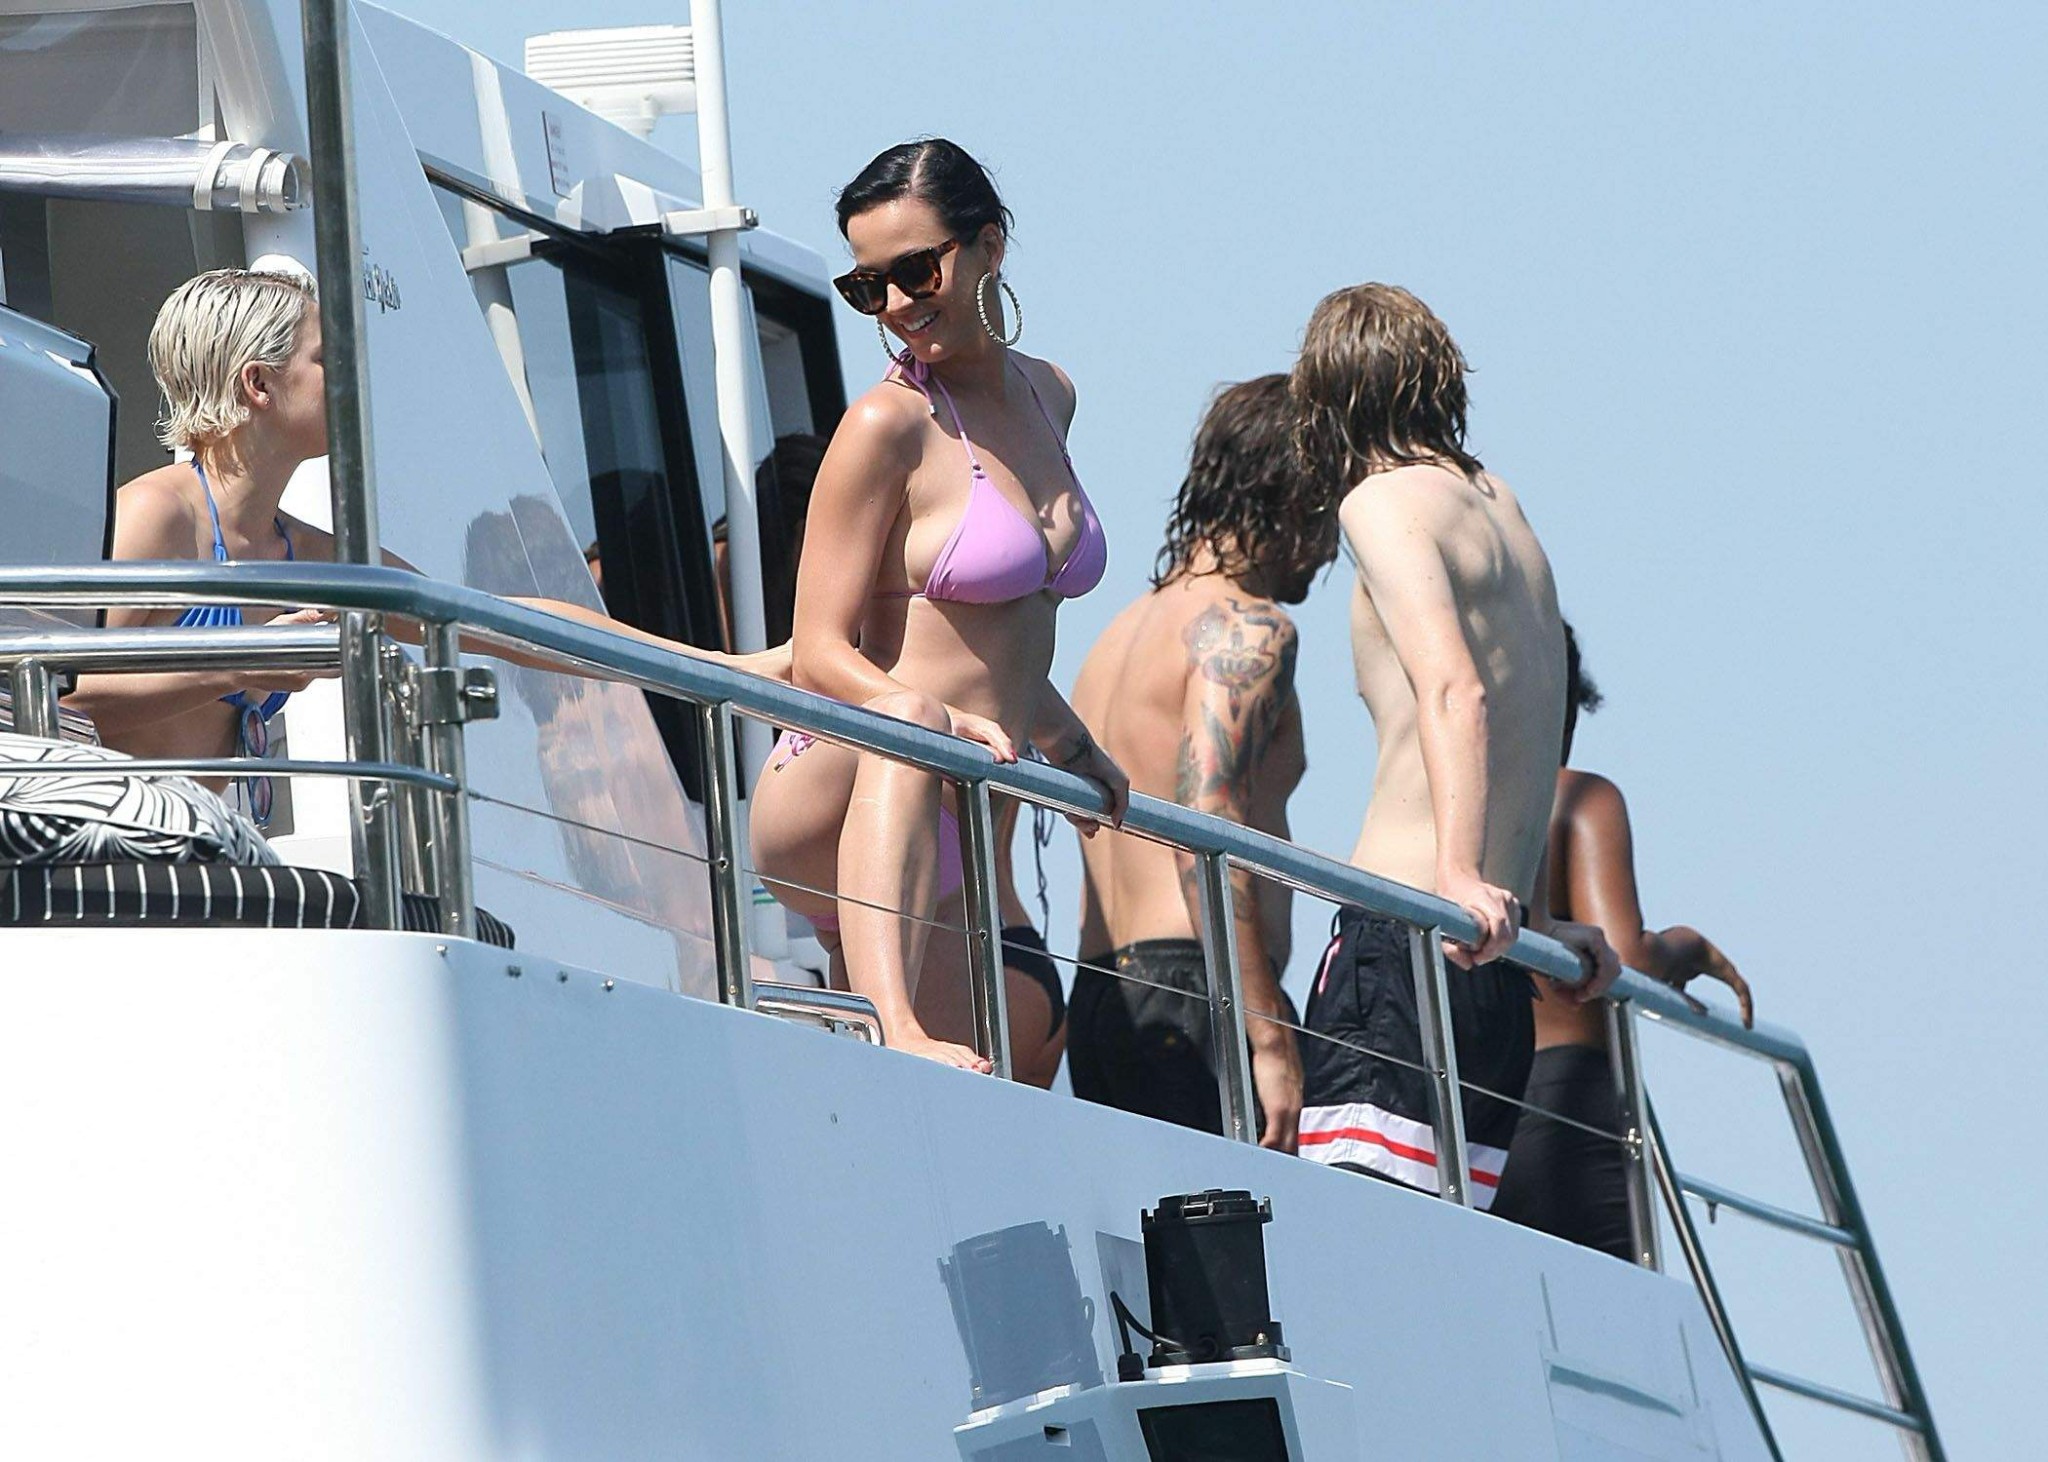 Katy Perry showing off her bikini body and cameltoe on a yacht in Sydney #75180243